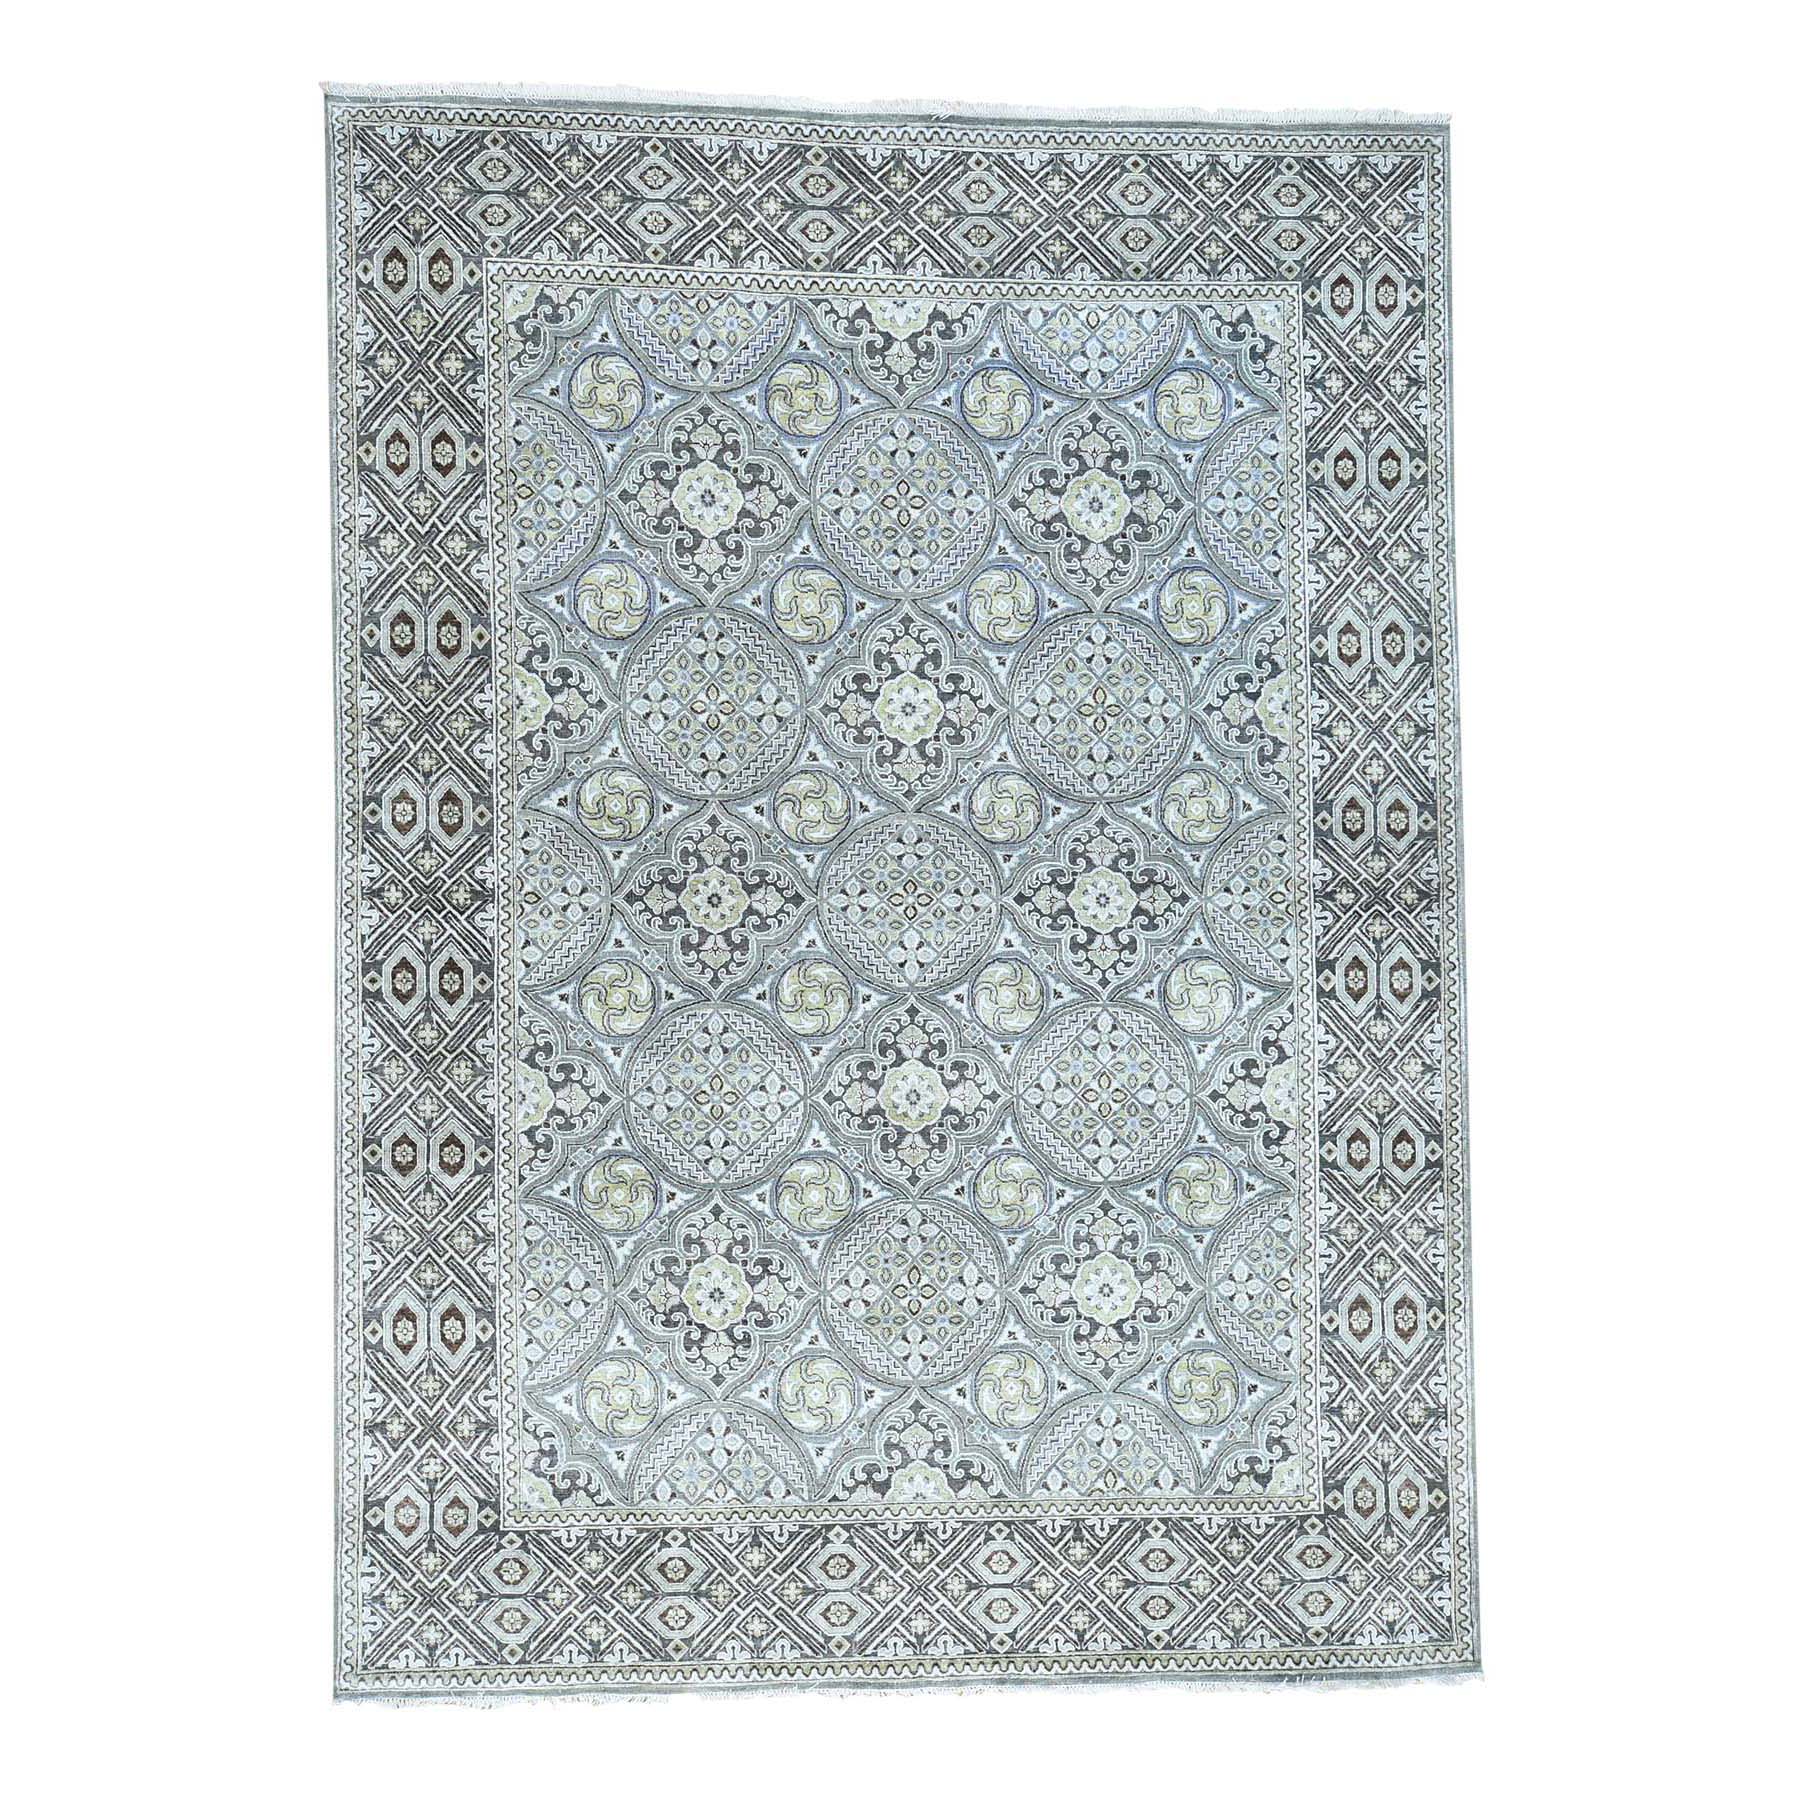 10'1"X14'4" Mughal Inspired Medallions Textured Wool And Silk Hand-Knotted Oriental Rug moadb079